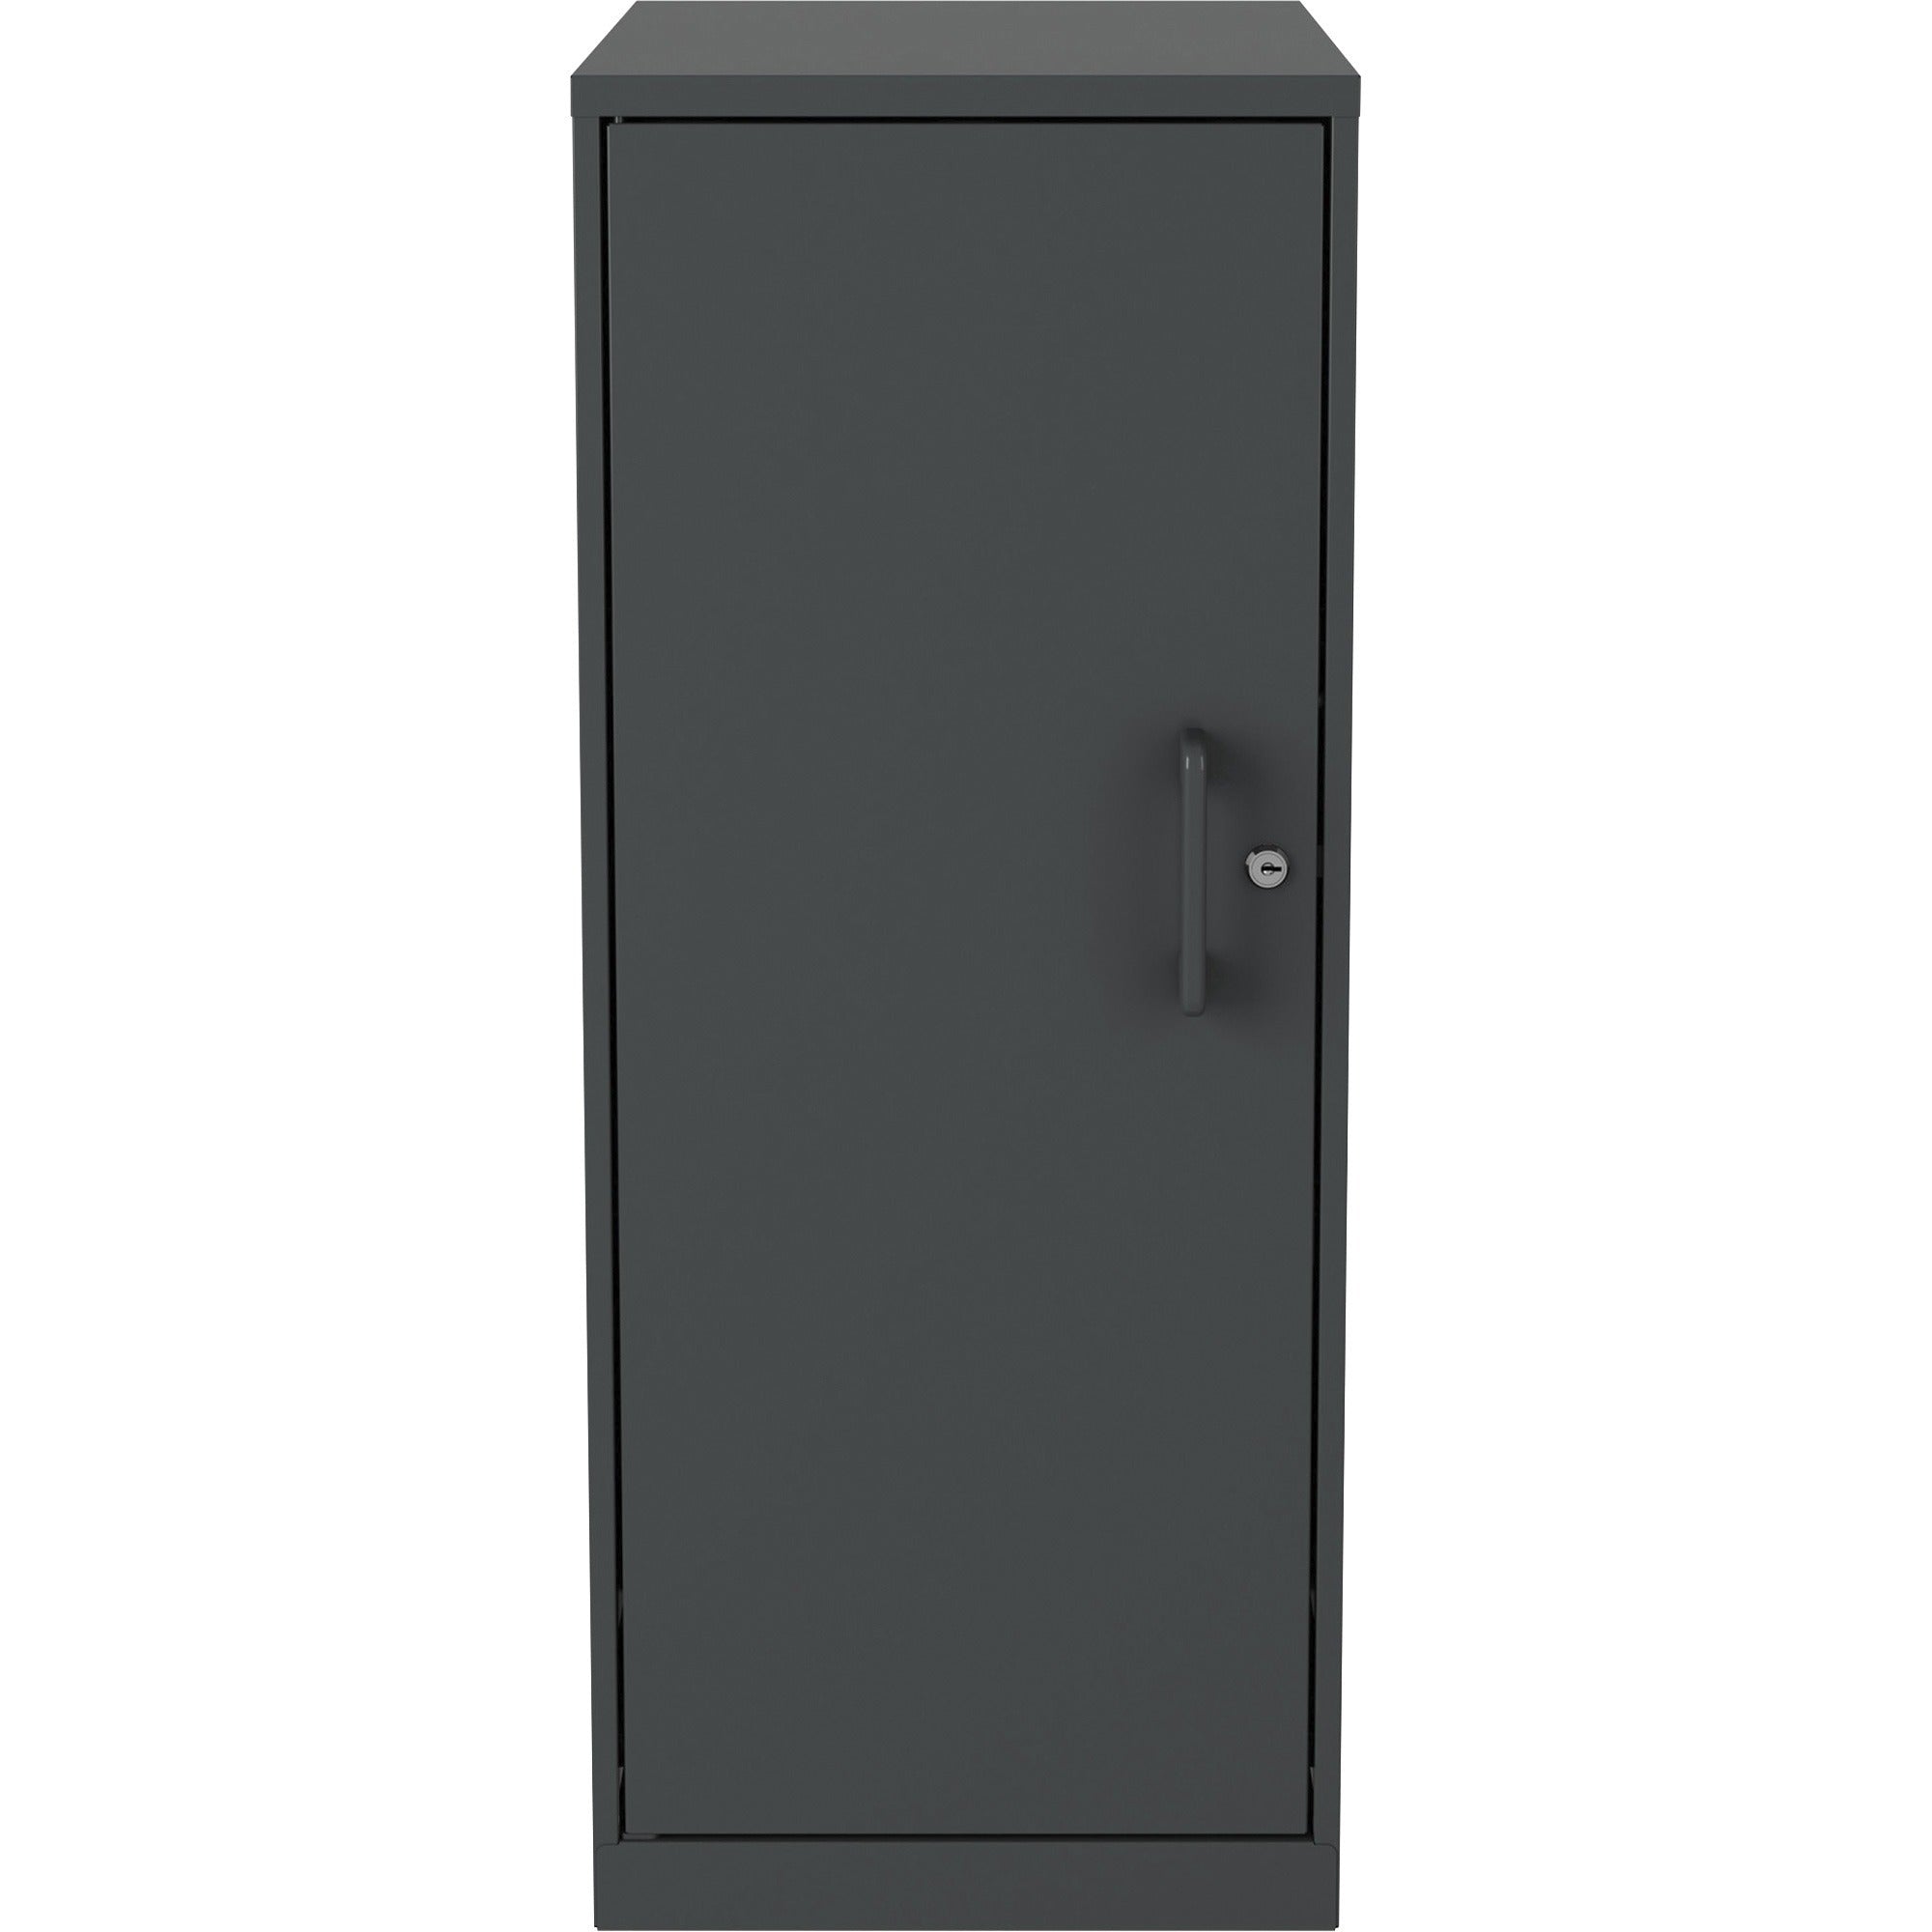 nusparc-personal-storage-cabinet-18-x-142-x-325-3-x-shelfves-hinged-doors-sturdy-durable-welded-eco-friendly-nonporous-surface-locking-mechanism-ventilated-locking-door-graphite-steel-recycled-taa-compliant_nprsc318zzml - 2